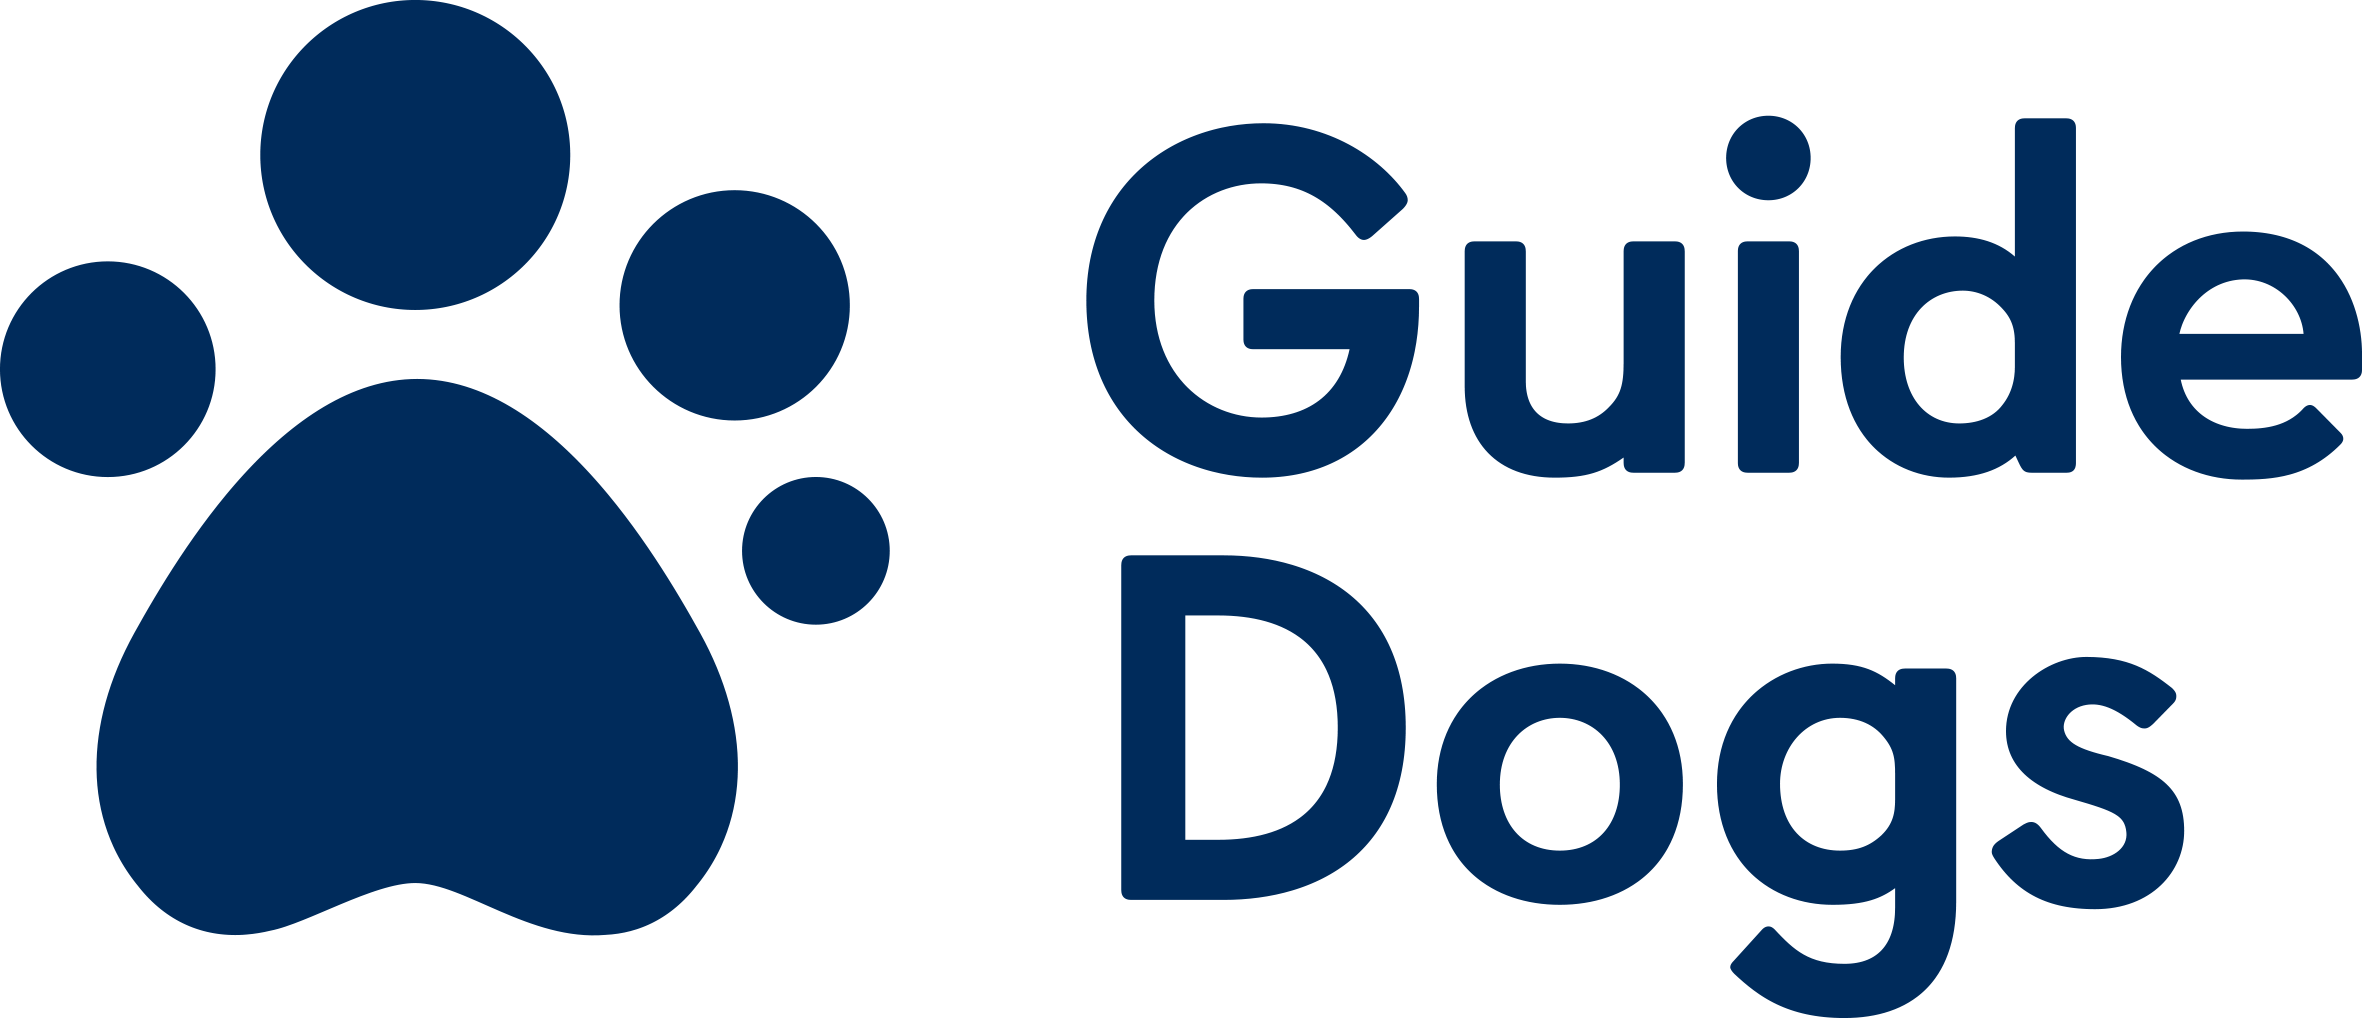 Image is the Guide Dogs logo in navy blue text. There is a paw print the left of the text.